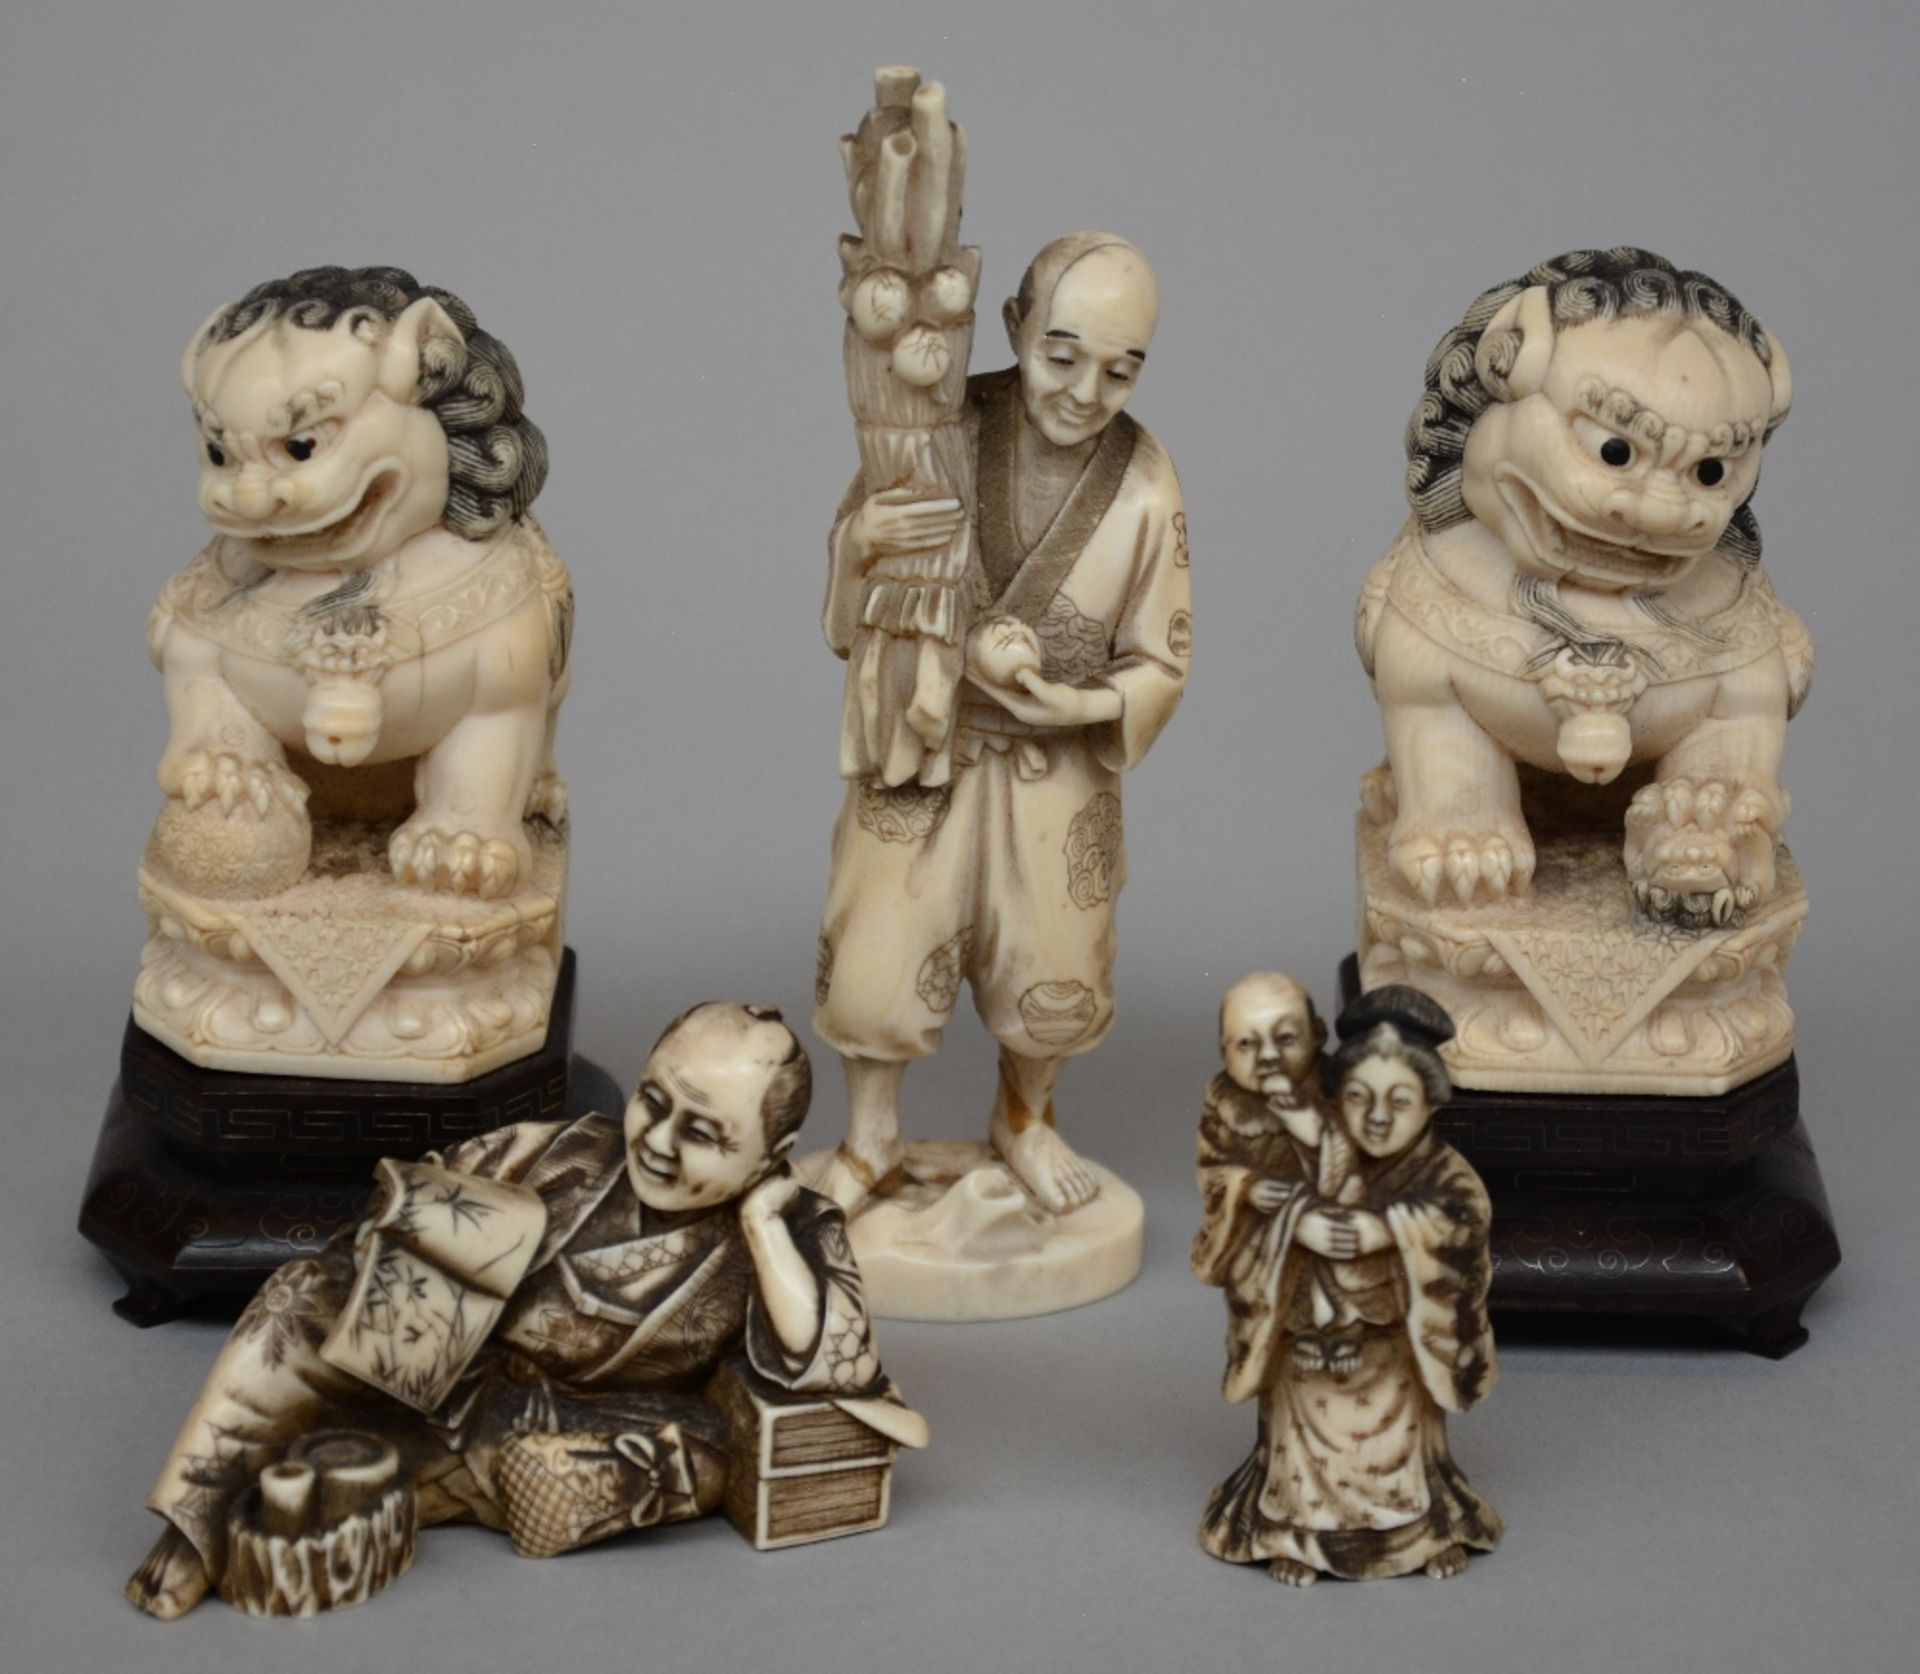 A pair of Chinese ivory Fu lions, on a wooden base, scrimshaw decorated, early 20thC, H 12,3 cm;